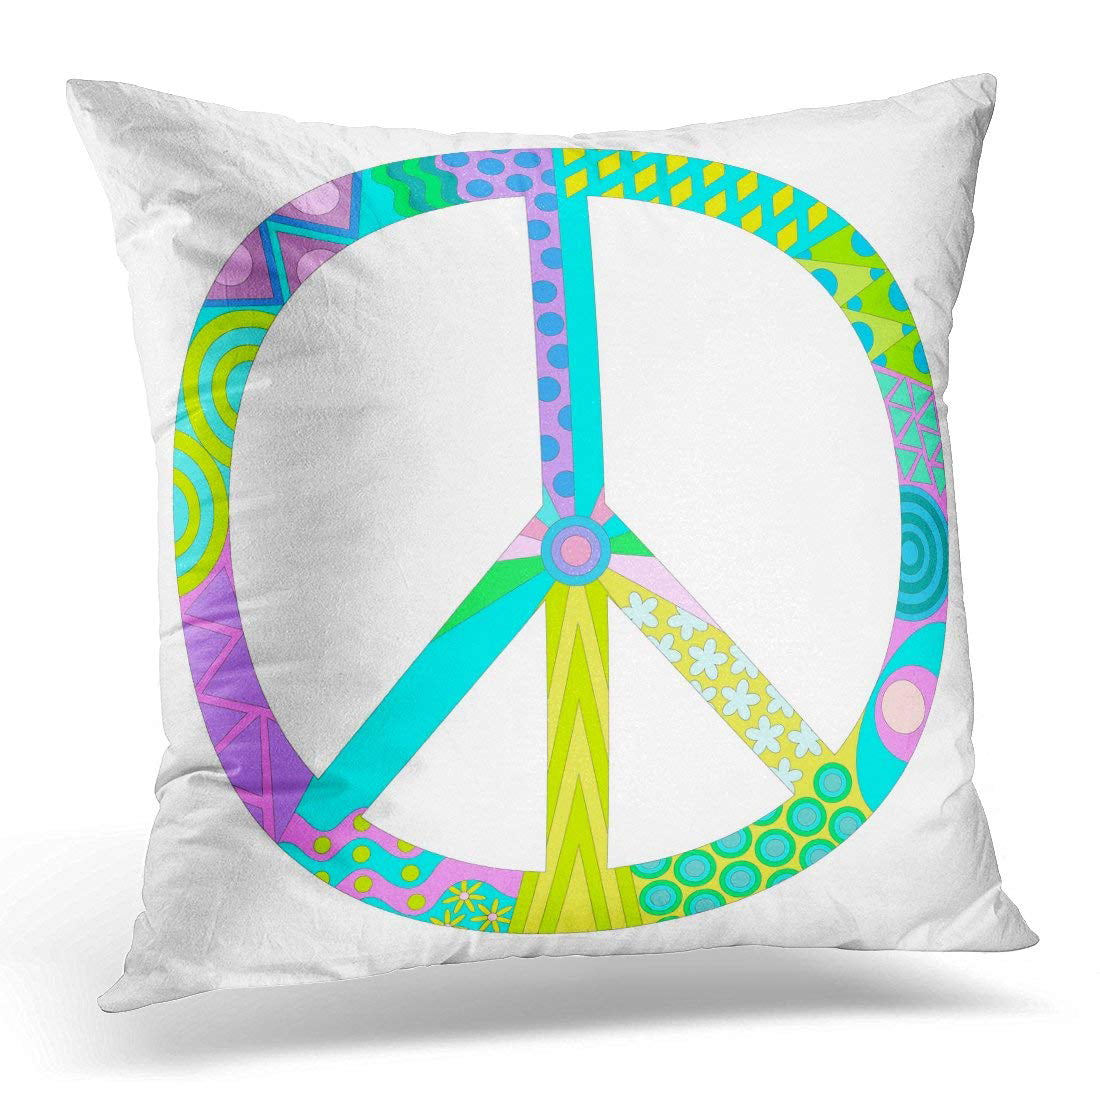 16x16 Multicolor Peaceful Society Life Whole World Love Truce Colorful Watercolor Peace Logo Sign for Unity of All Human Throw Pillow